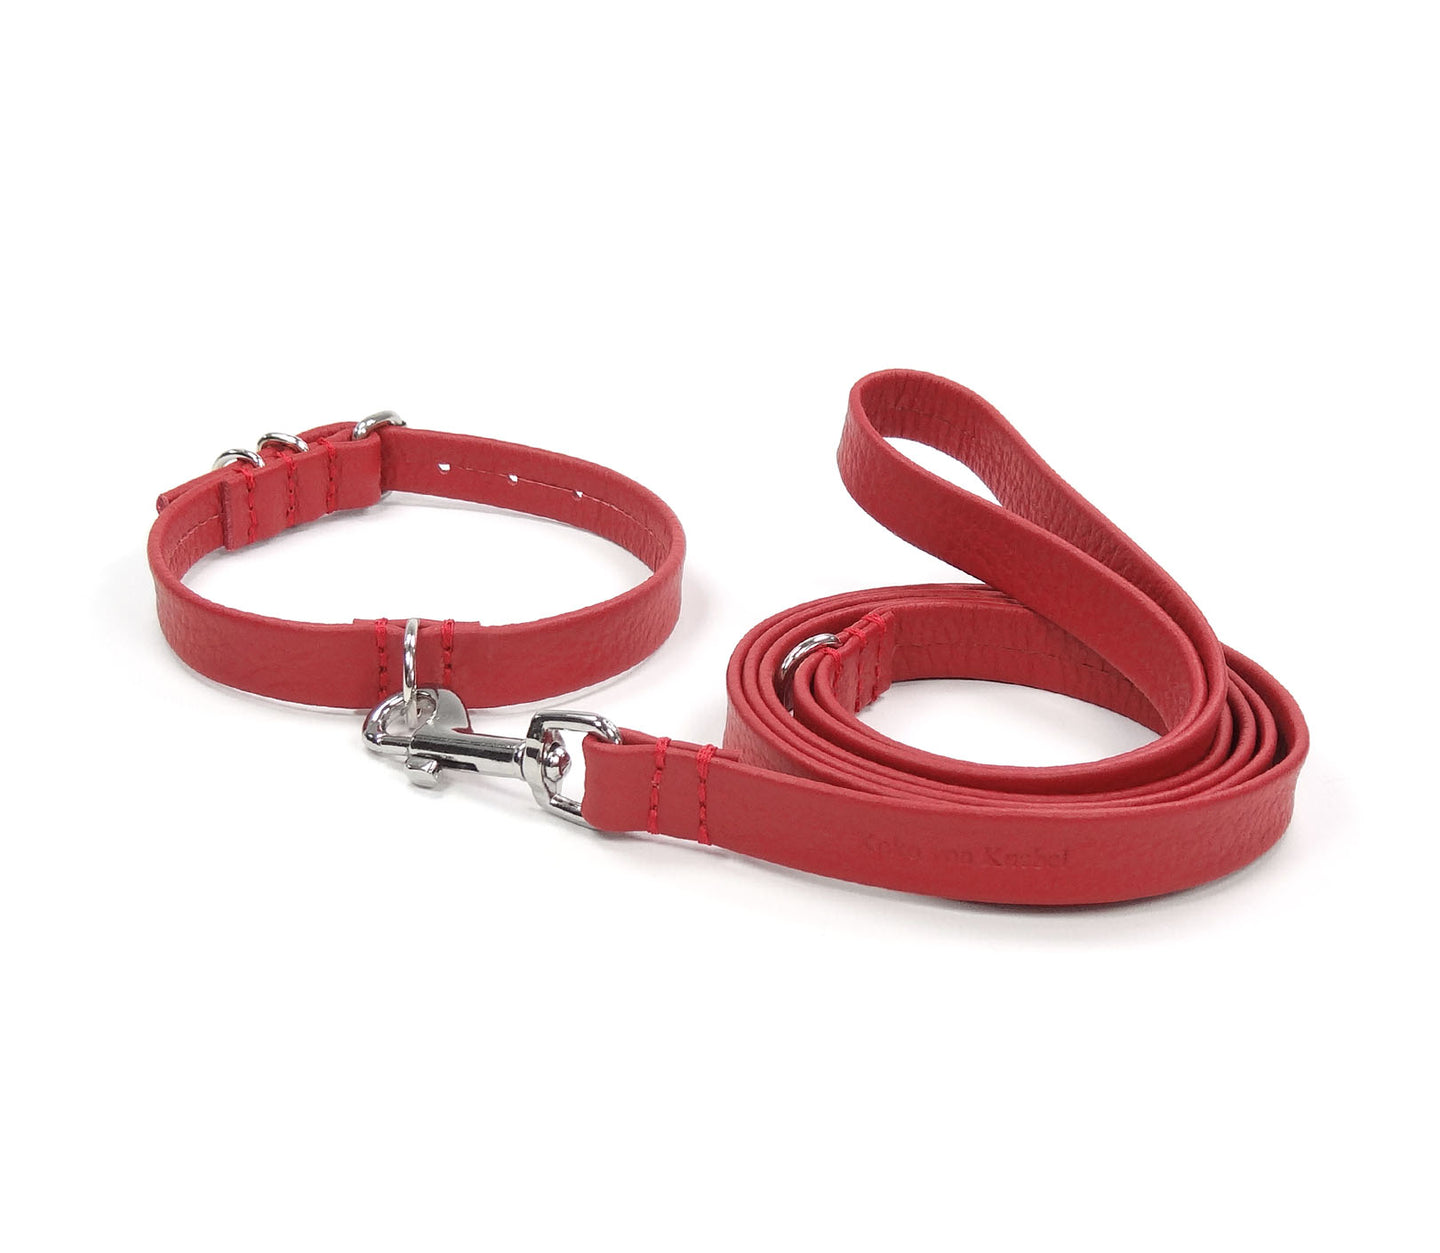 Ottos Puppy Set - collar & leash set - for small four-legged friends and puppies